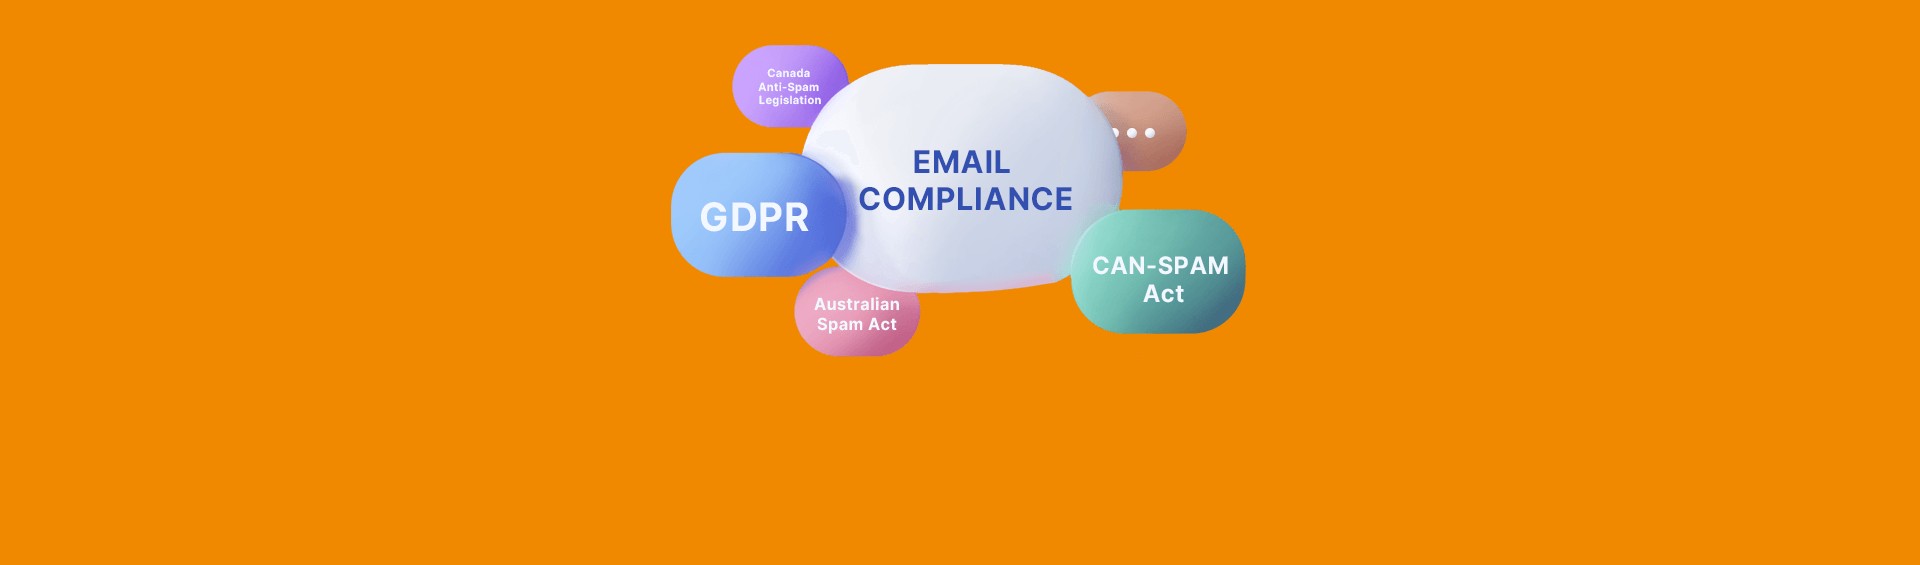 Email Marketing Compliance Explained: What To Do To Stay Legal